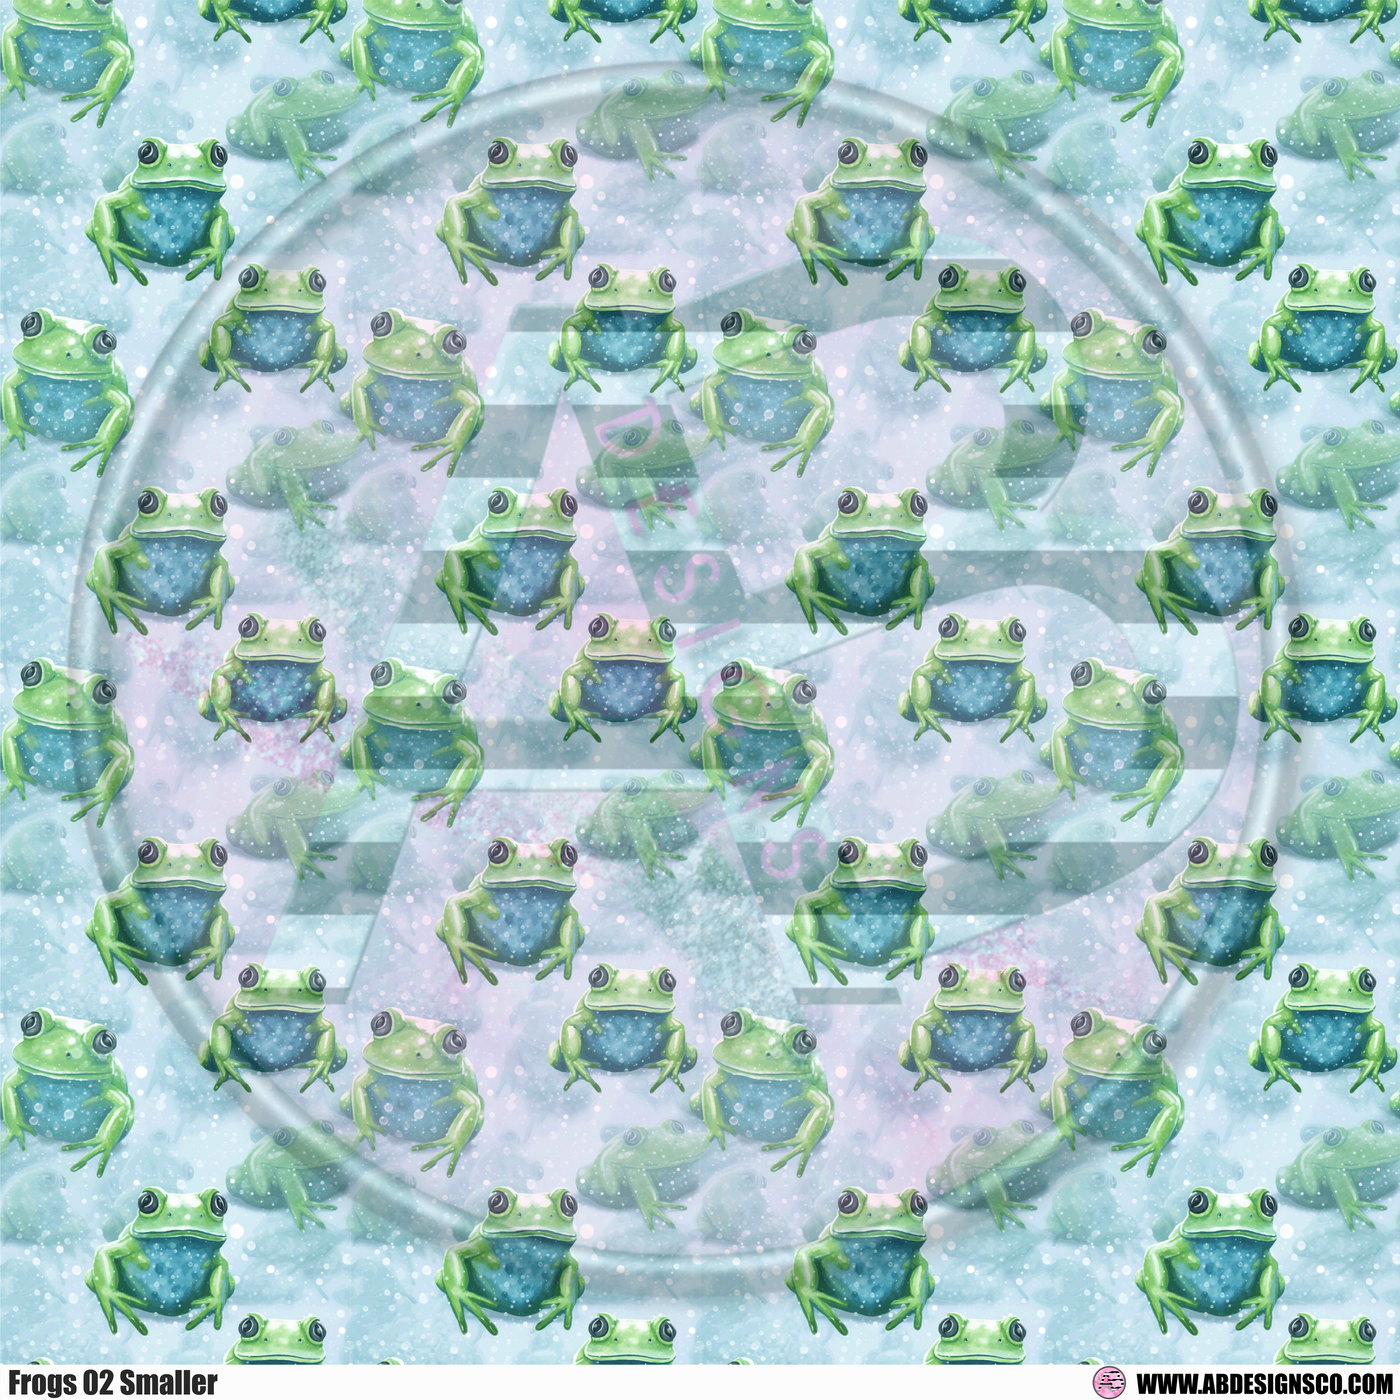 Adhesive Patterned Vinyl - Frog 02 Smaller